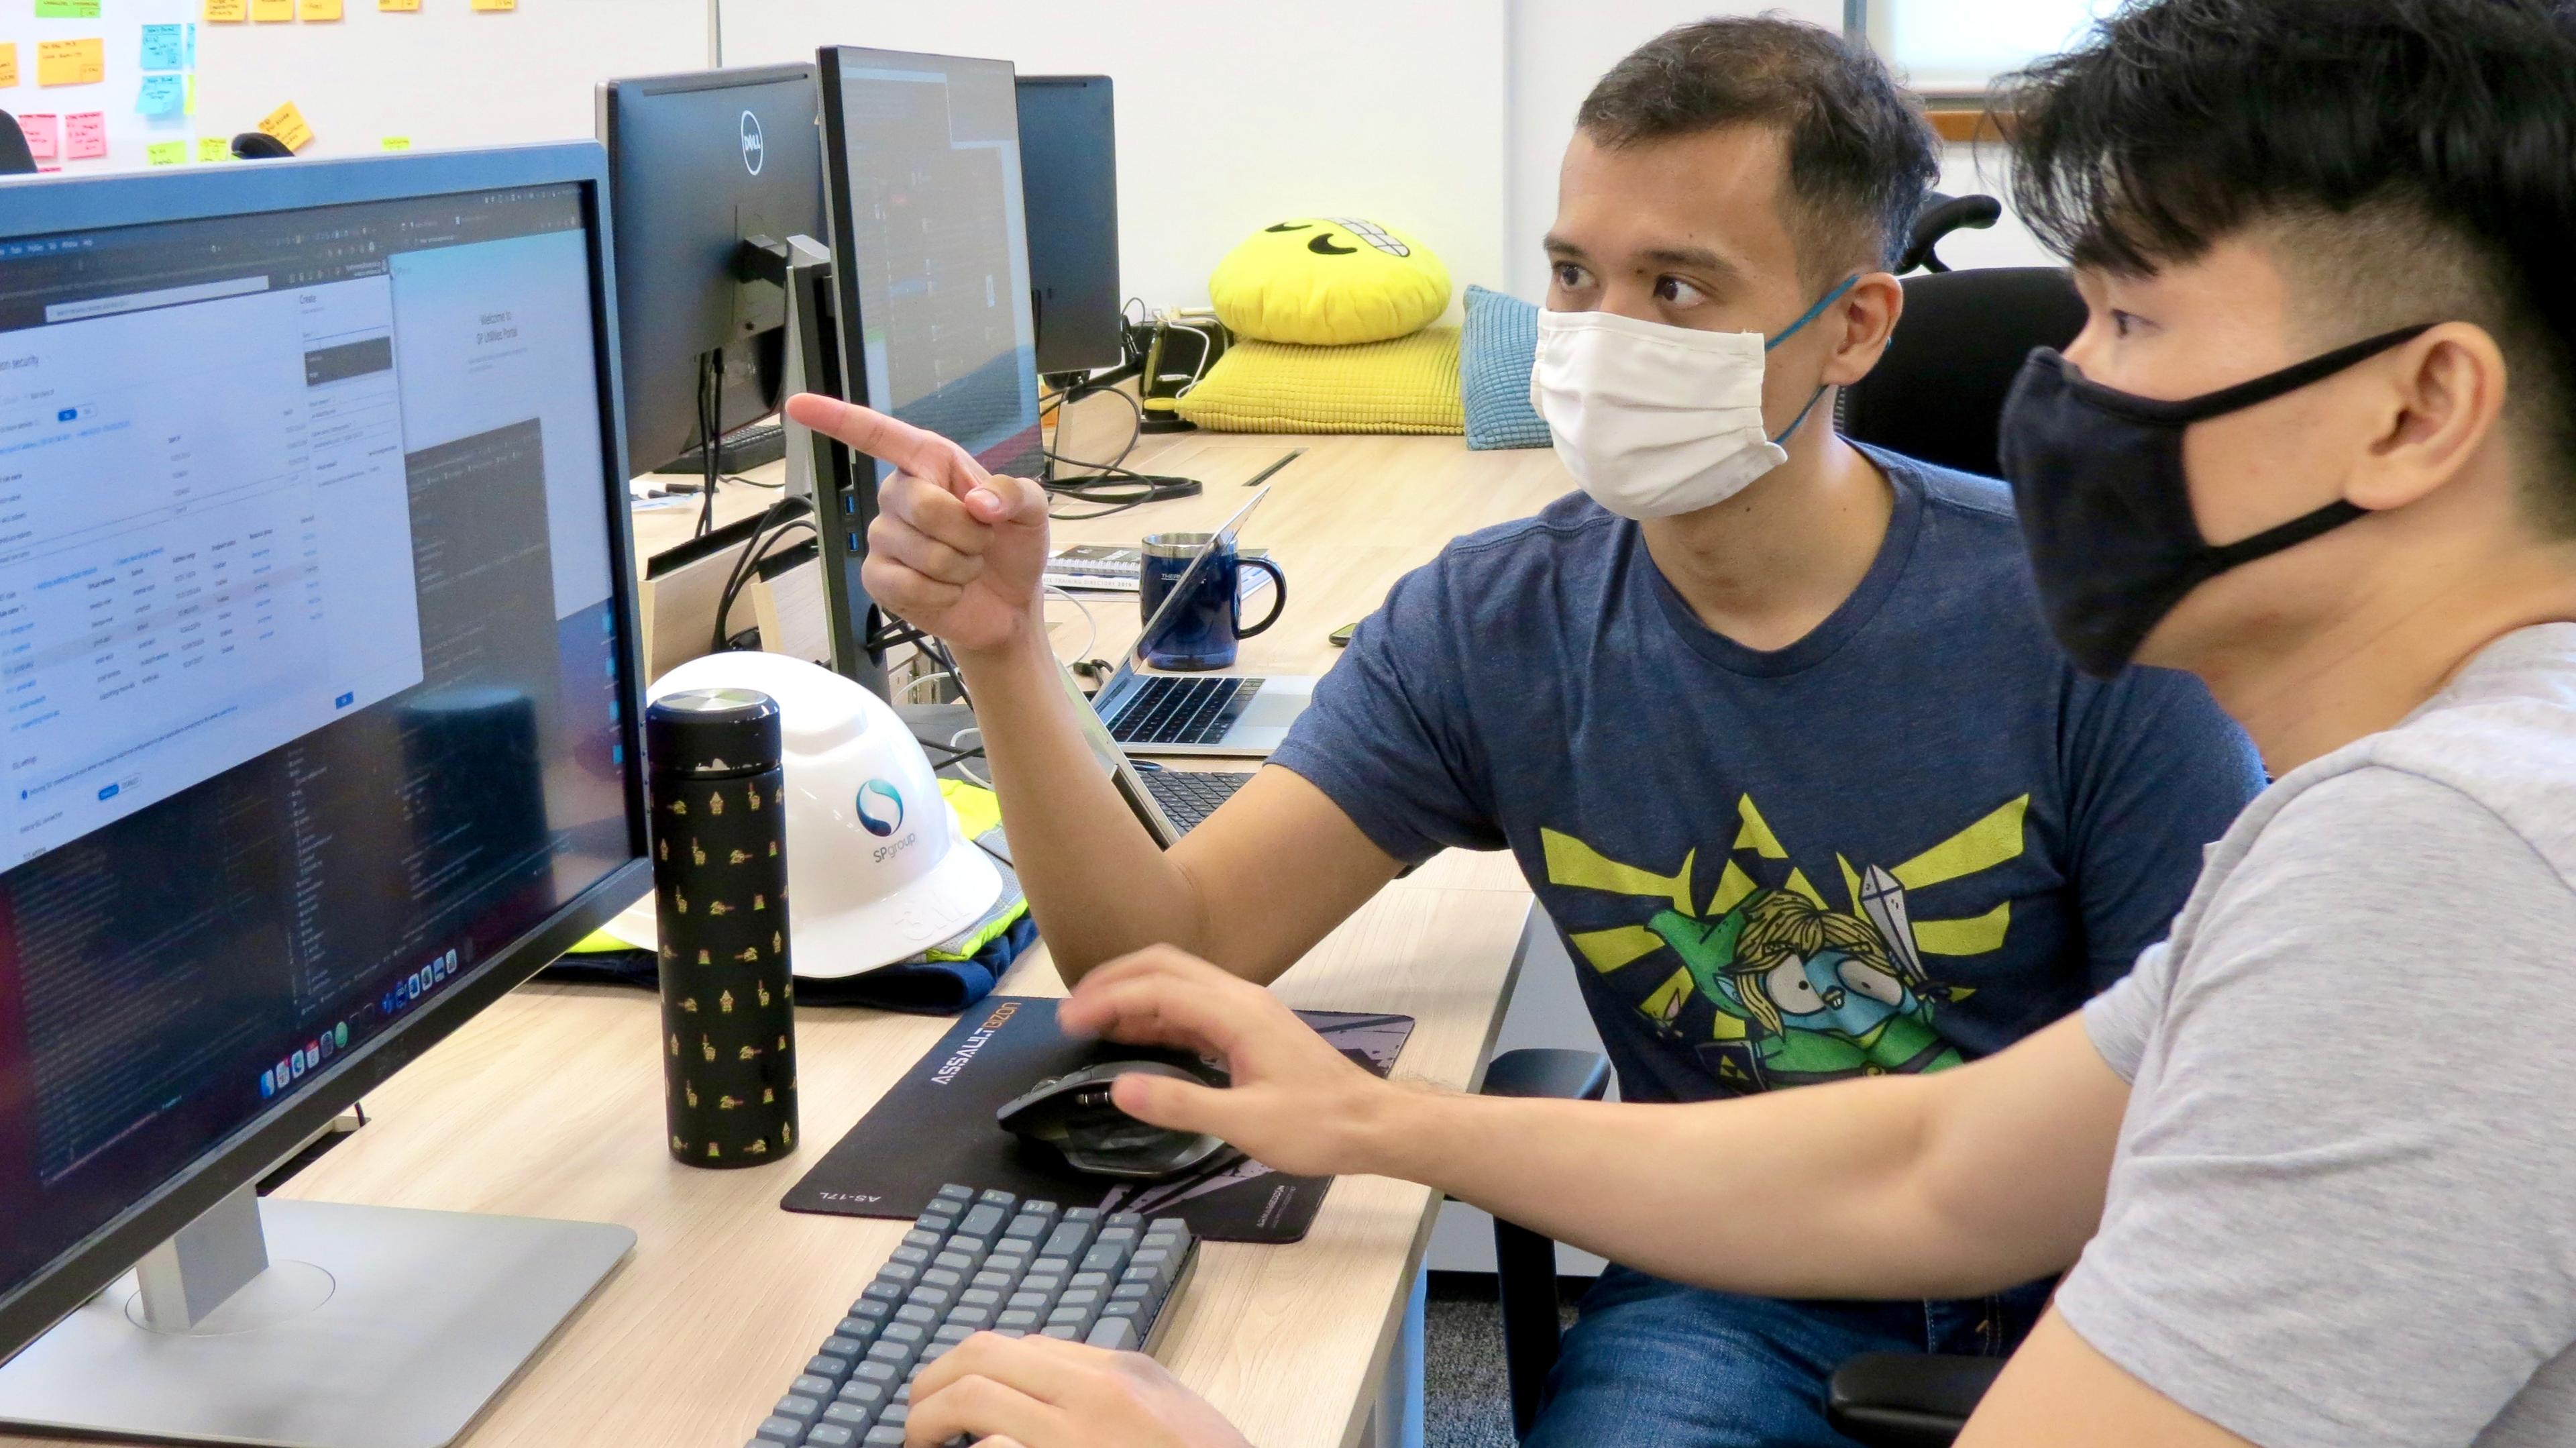 Ibrahim and his colleague, Senior Software Engineer Wong Yat Hong working on monitoring of cloud systems.